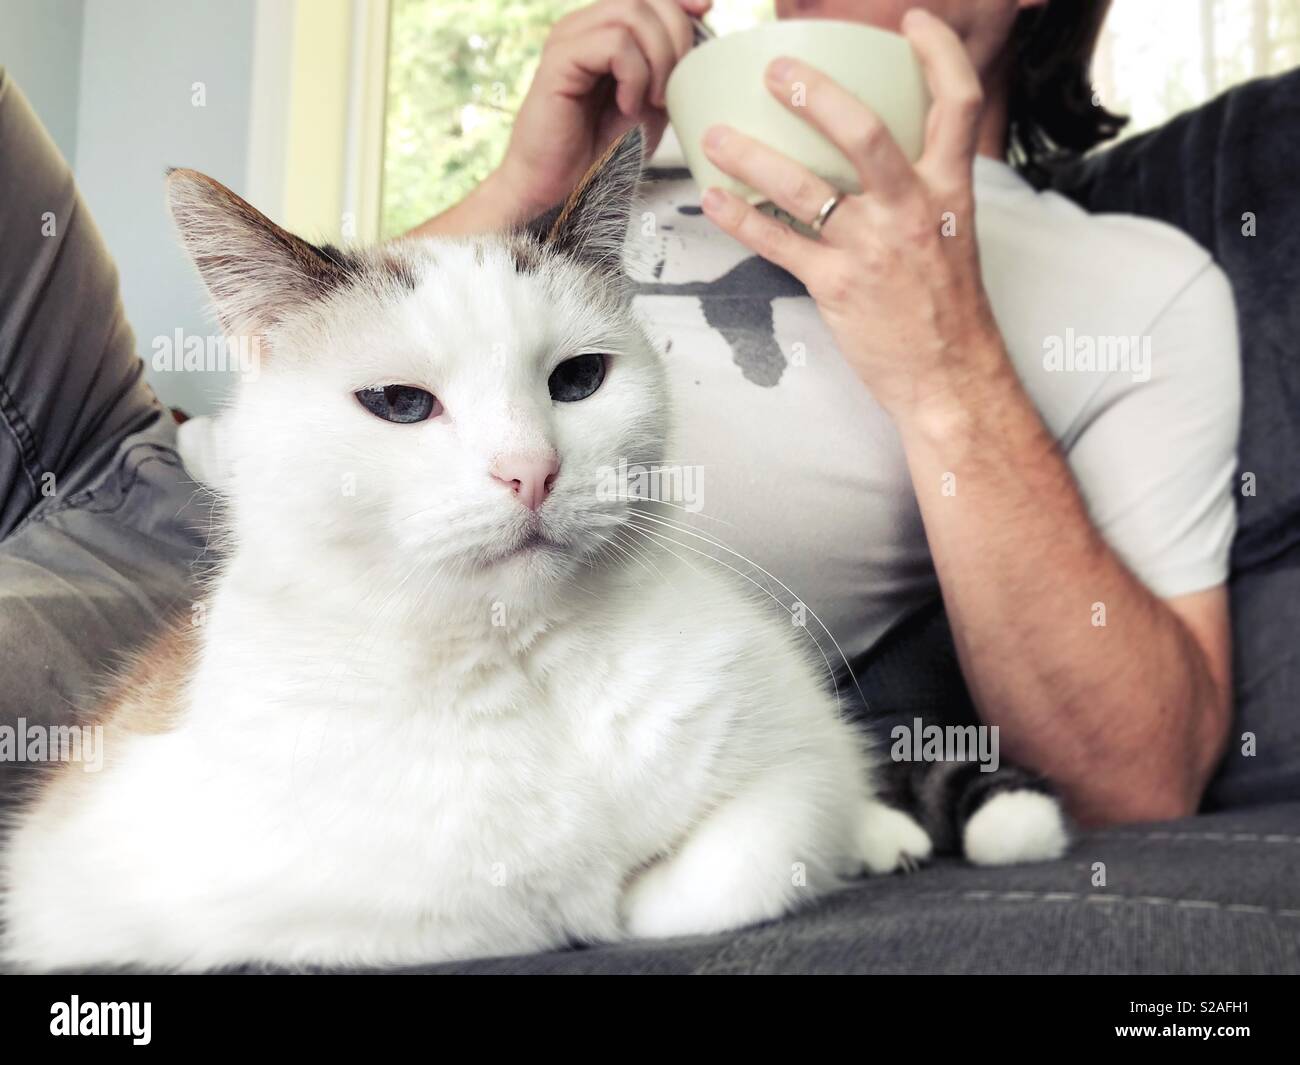 A cat sitting next to a man who is eating from a bowl. Stock Photo